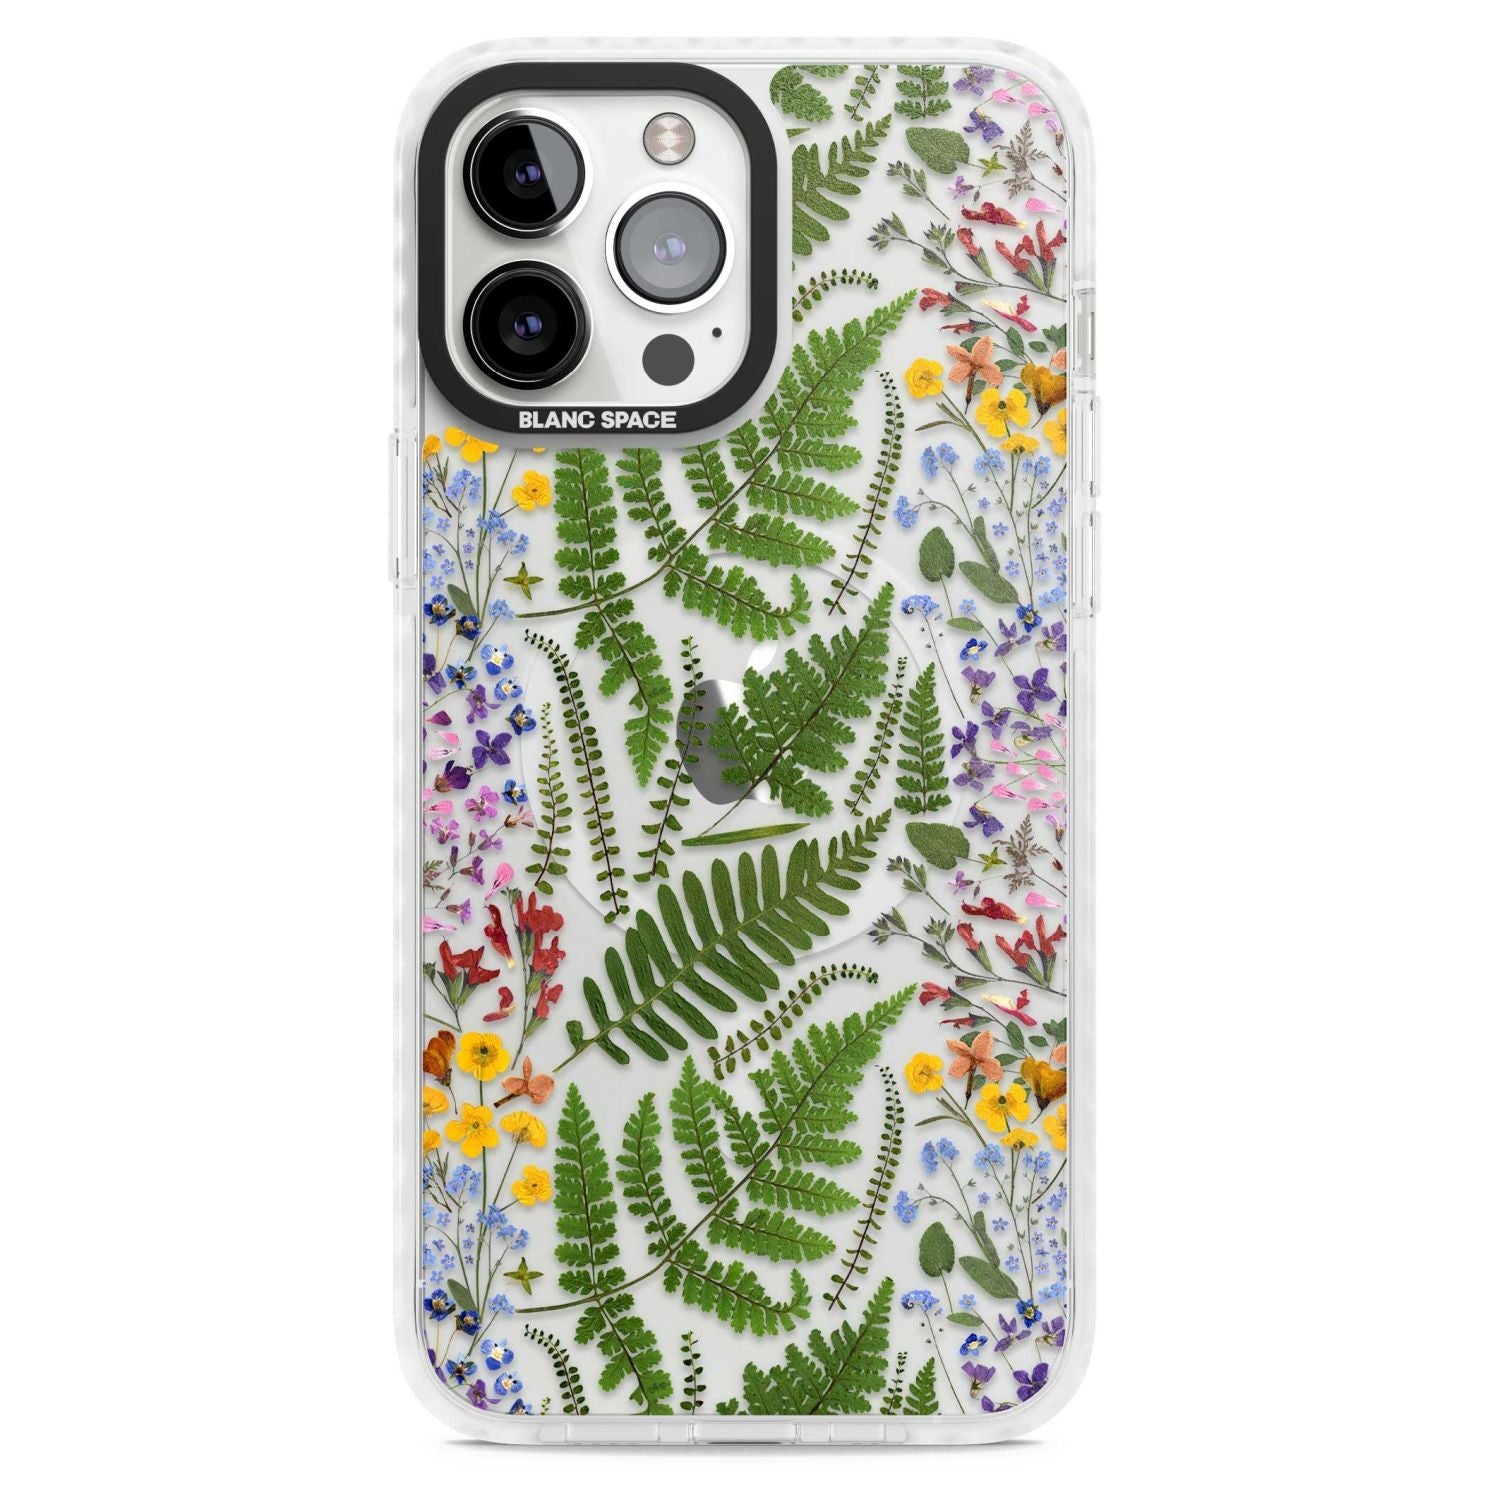 Busy Floral and Fern Design